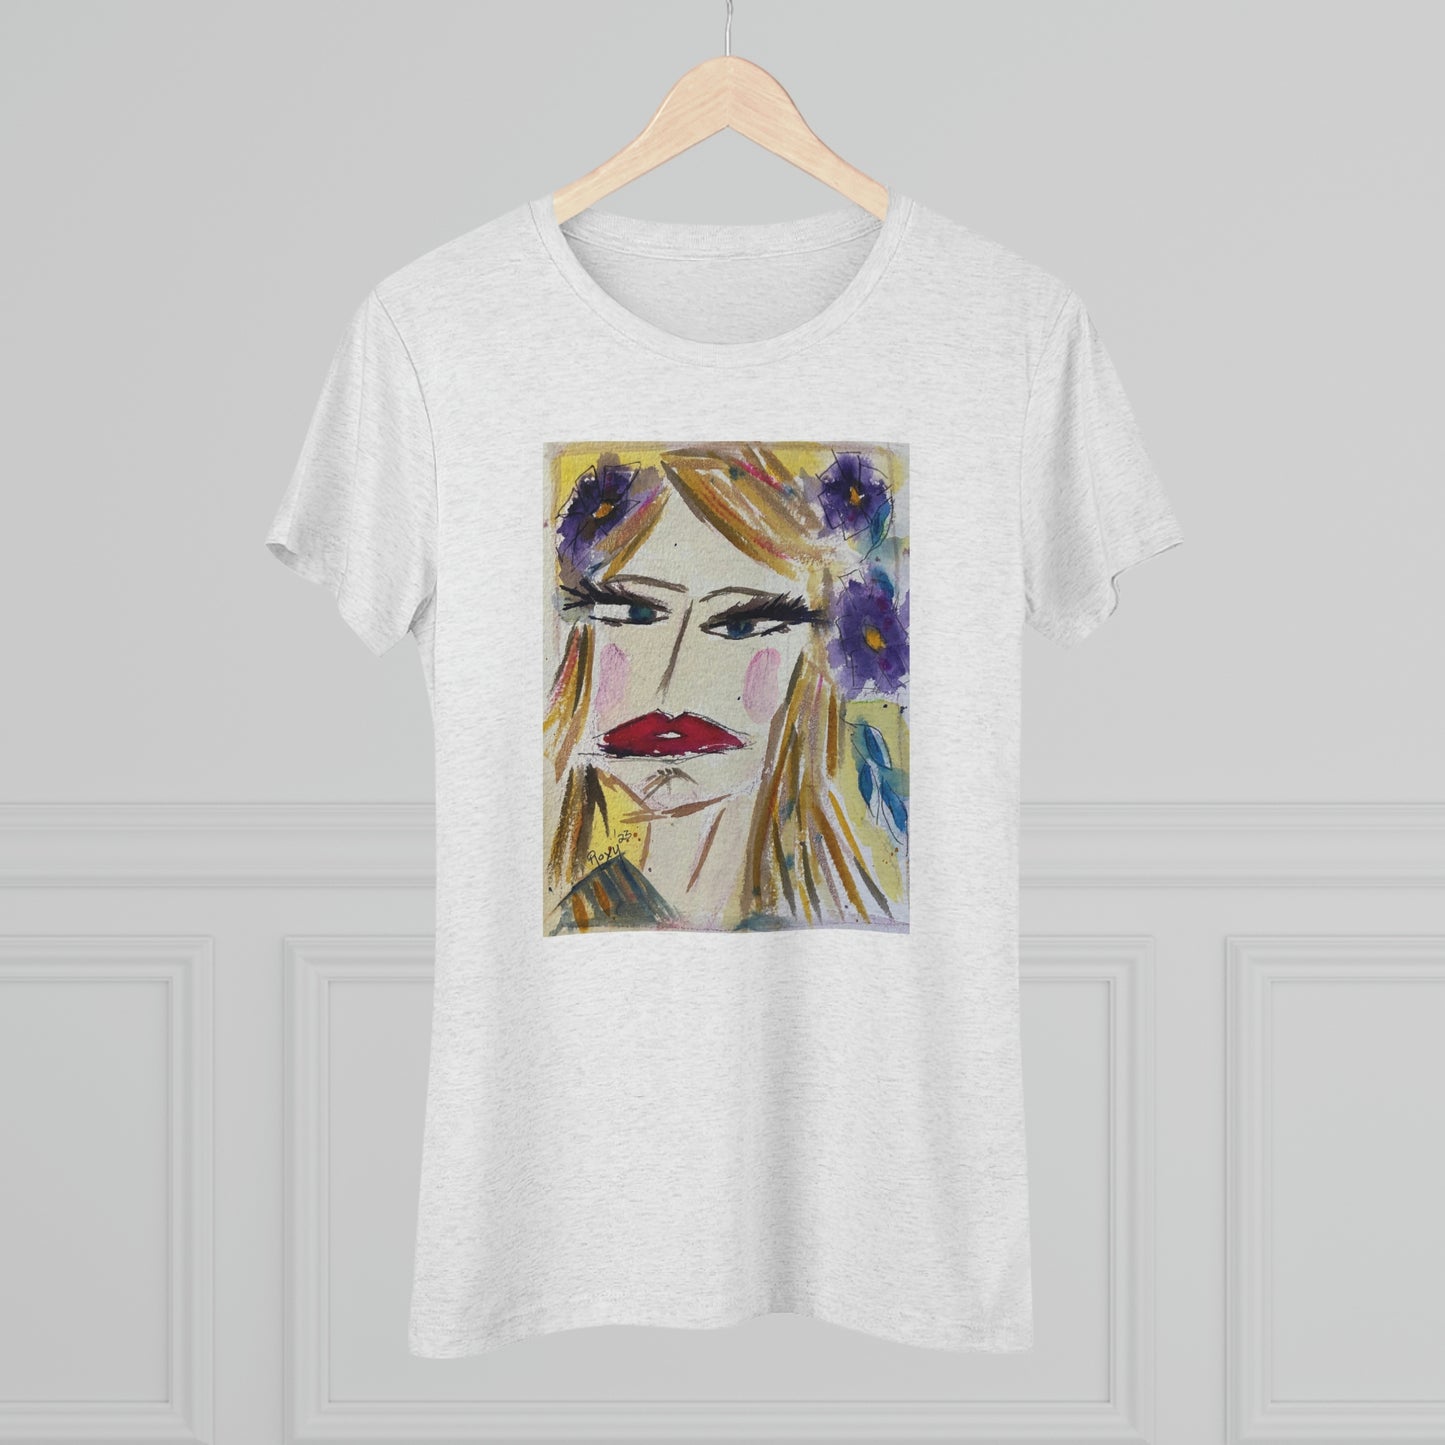 Women's fitted Triblend Tee  tee shirt  featuring "Whatever!" painting